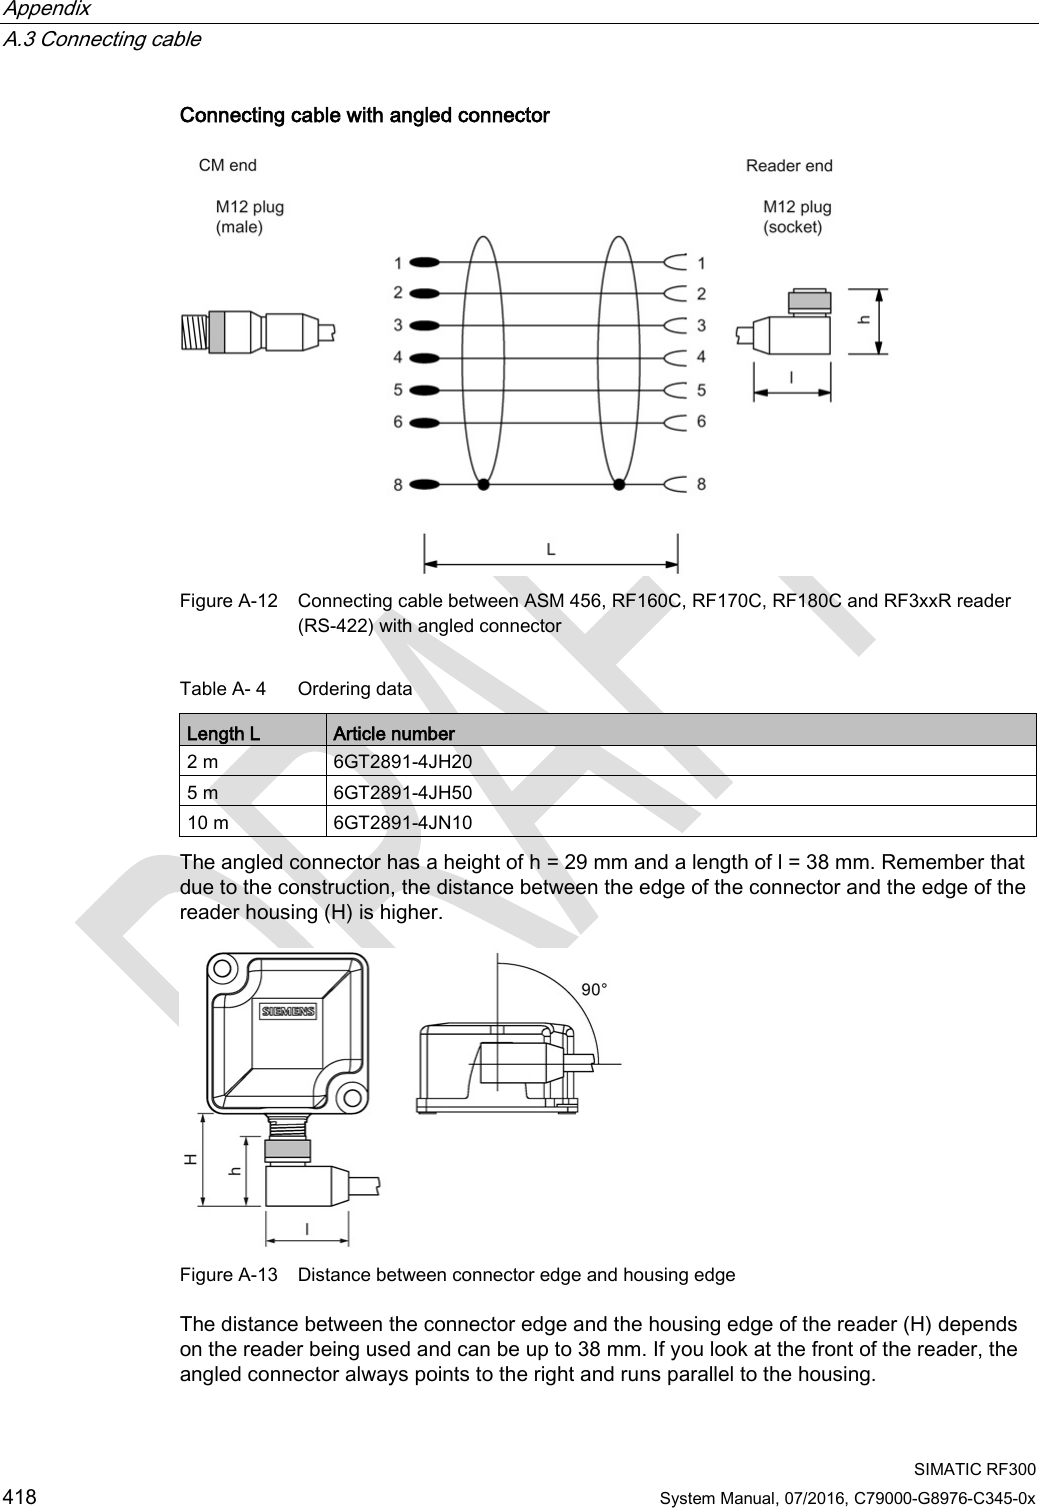 Appendix   A.3 Connecting cable  SIMATIC RF300 418 System Manual, 07/2016, C79000-G8976-C345-0x Connecting cable with angled connector  Figure A-12 Connecting cable between ASM 456, RF160C, RF170C, RF180C and RF3xxR reader (RS-422) with angled connector Table A- 4  Ordering data Length L Article number 2 m 6GT2891-4JH20 5 m 6GT2891-4JH50 10 m 6GT2891-4JN10 The angled connector has a height of h = 29 mm and a length of l = 38 mm. Remember that due to the construction, the distance between the edge of the connector and the edge of the reader housing (H) is higher.  Figure A-13 Distance between connector edge and housing edge The distance between the connector edge and the housing edge of the reader (H) depends on the reader being used and can be up to 38 mm. If you look at the front of the reader, the angled connector always points to the right and runs parallel to the housing. 